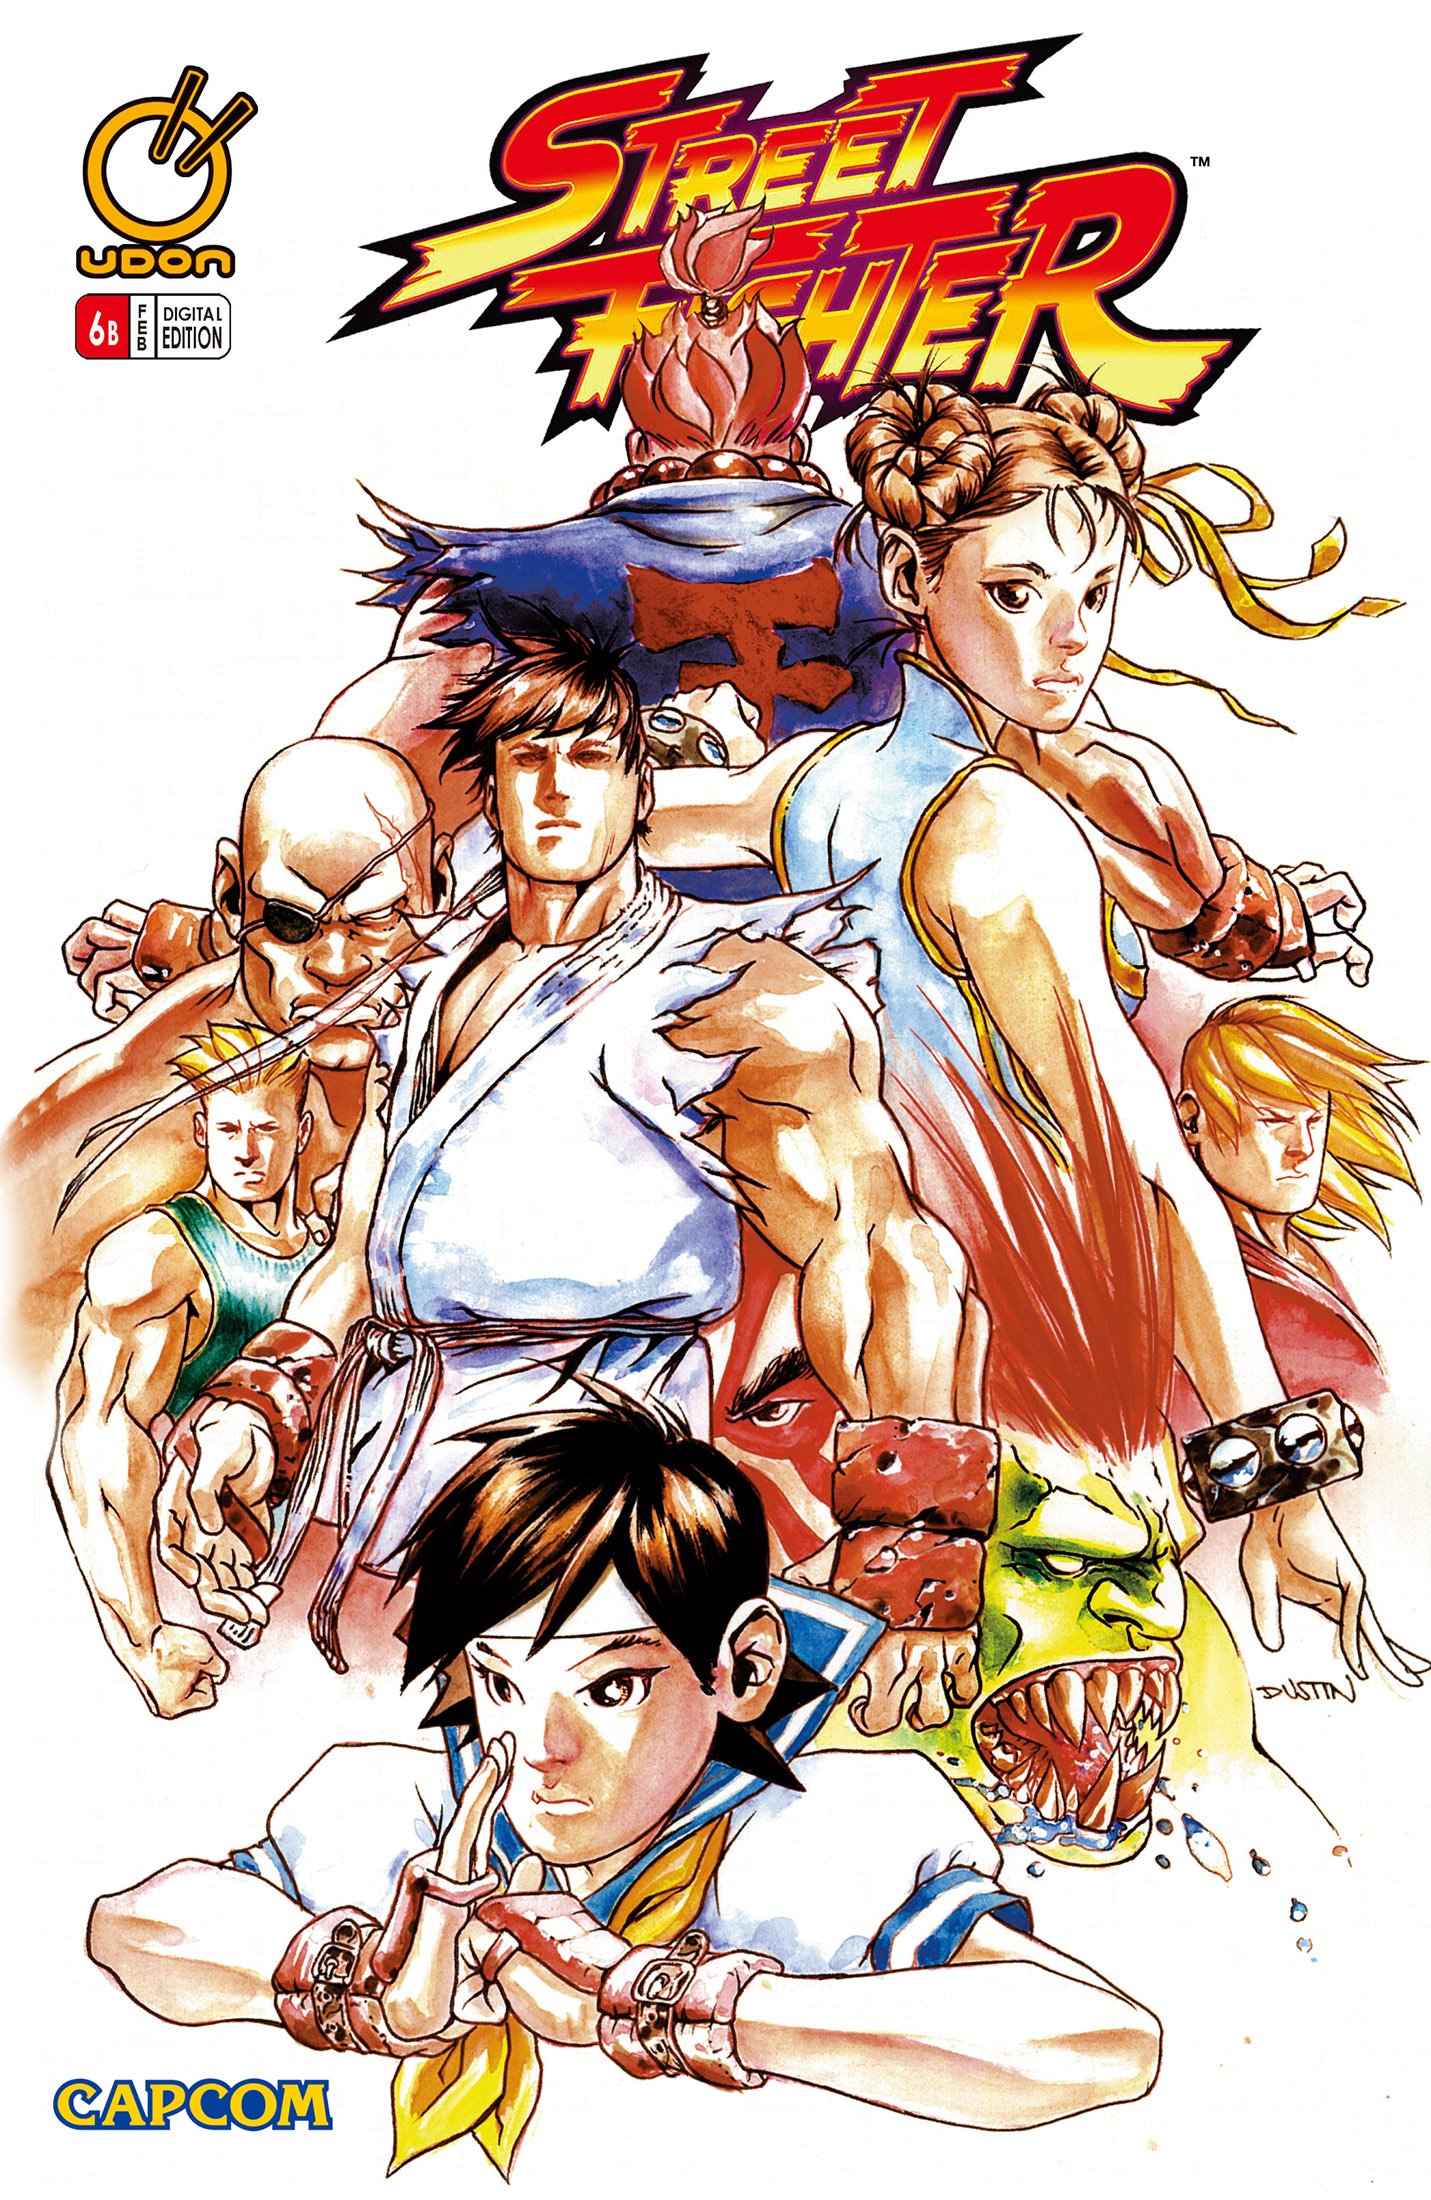 Street Fighter Vol.1 006 (February 2004) (cover b)